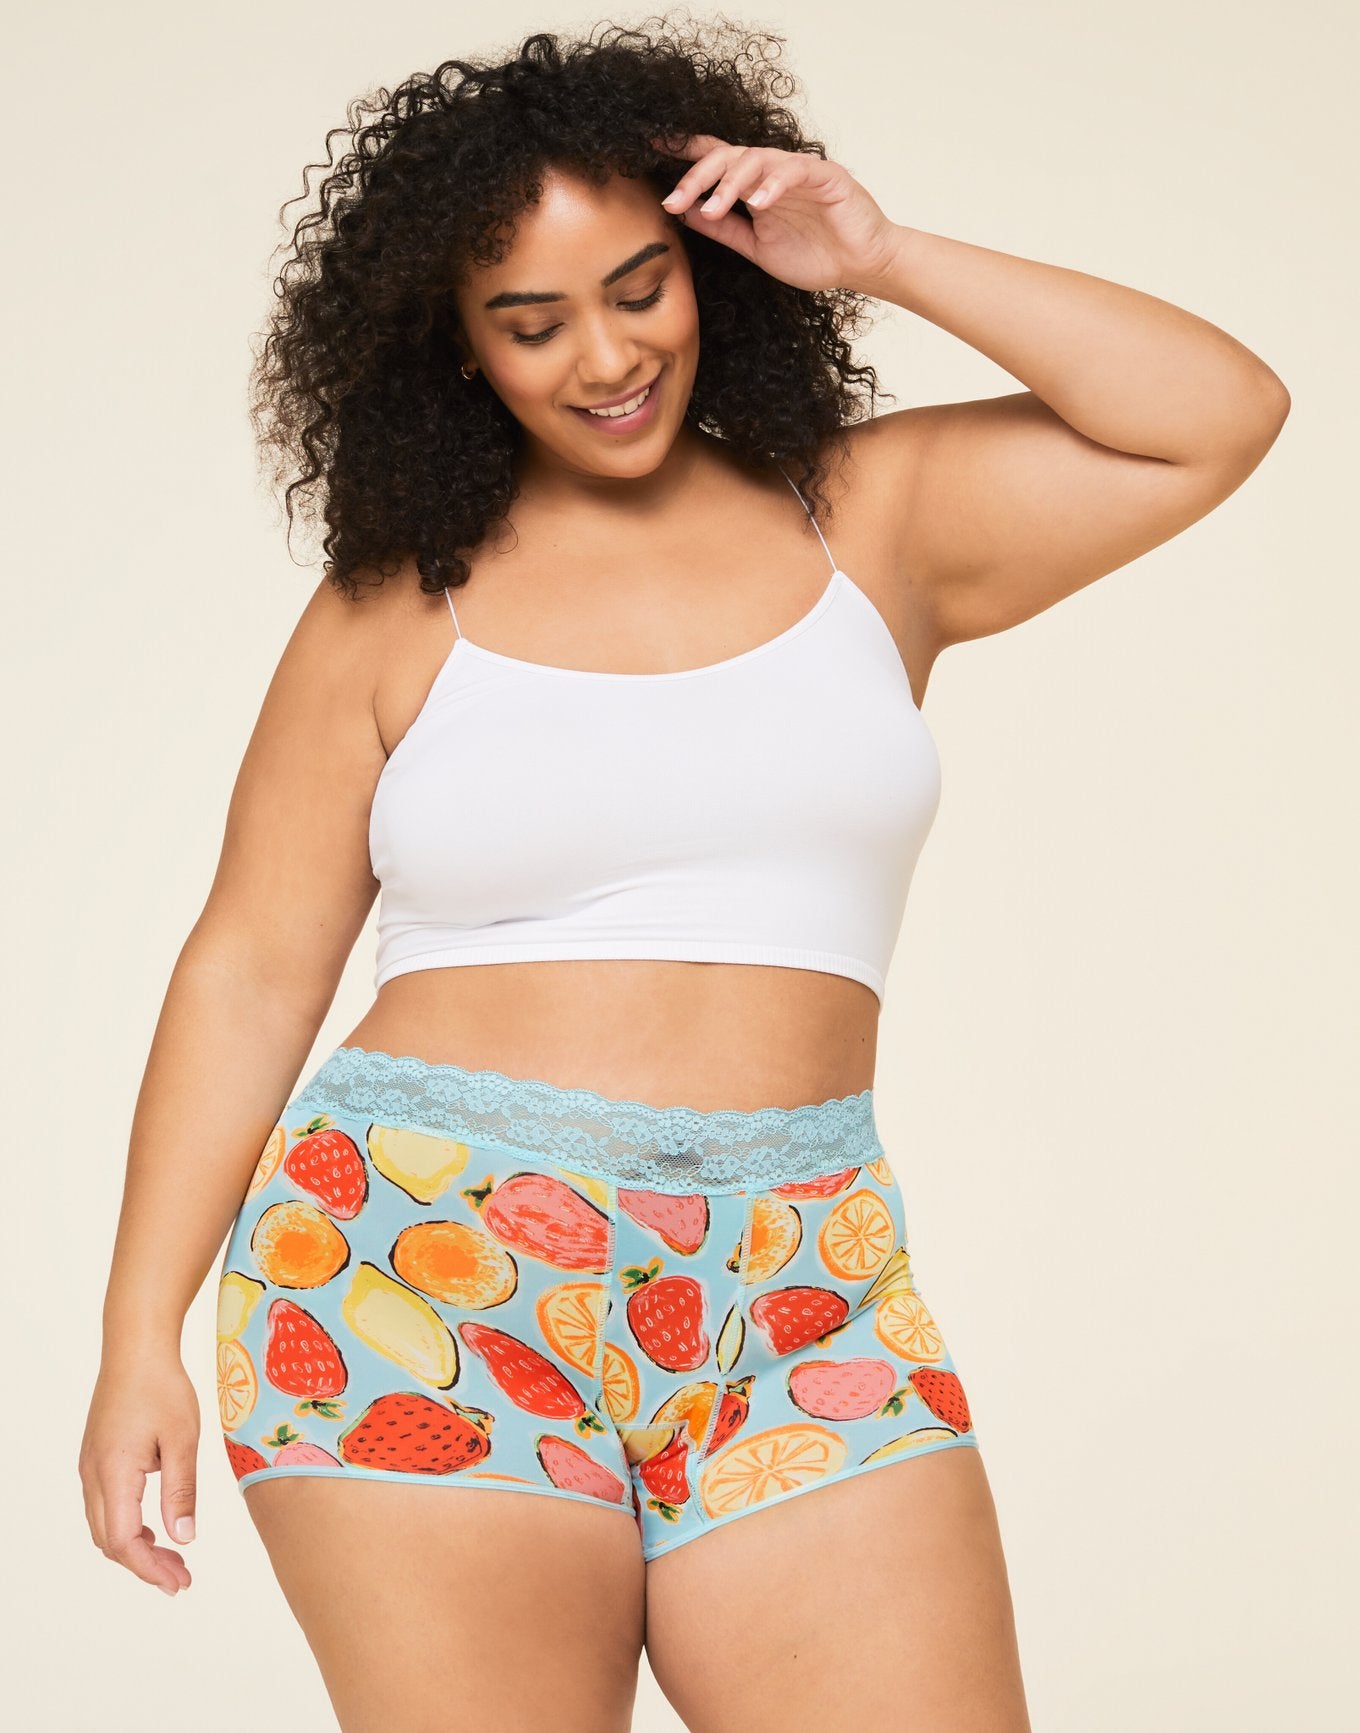 Joyja Emily period-proof panty in color Painterly Fruit C01 and shape shortie